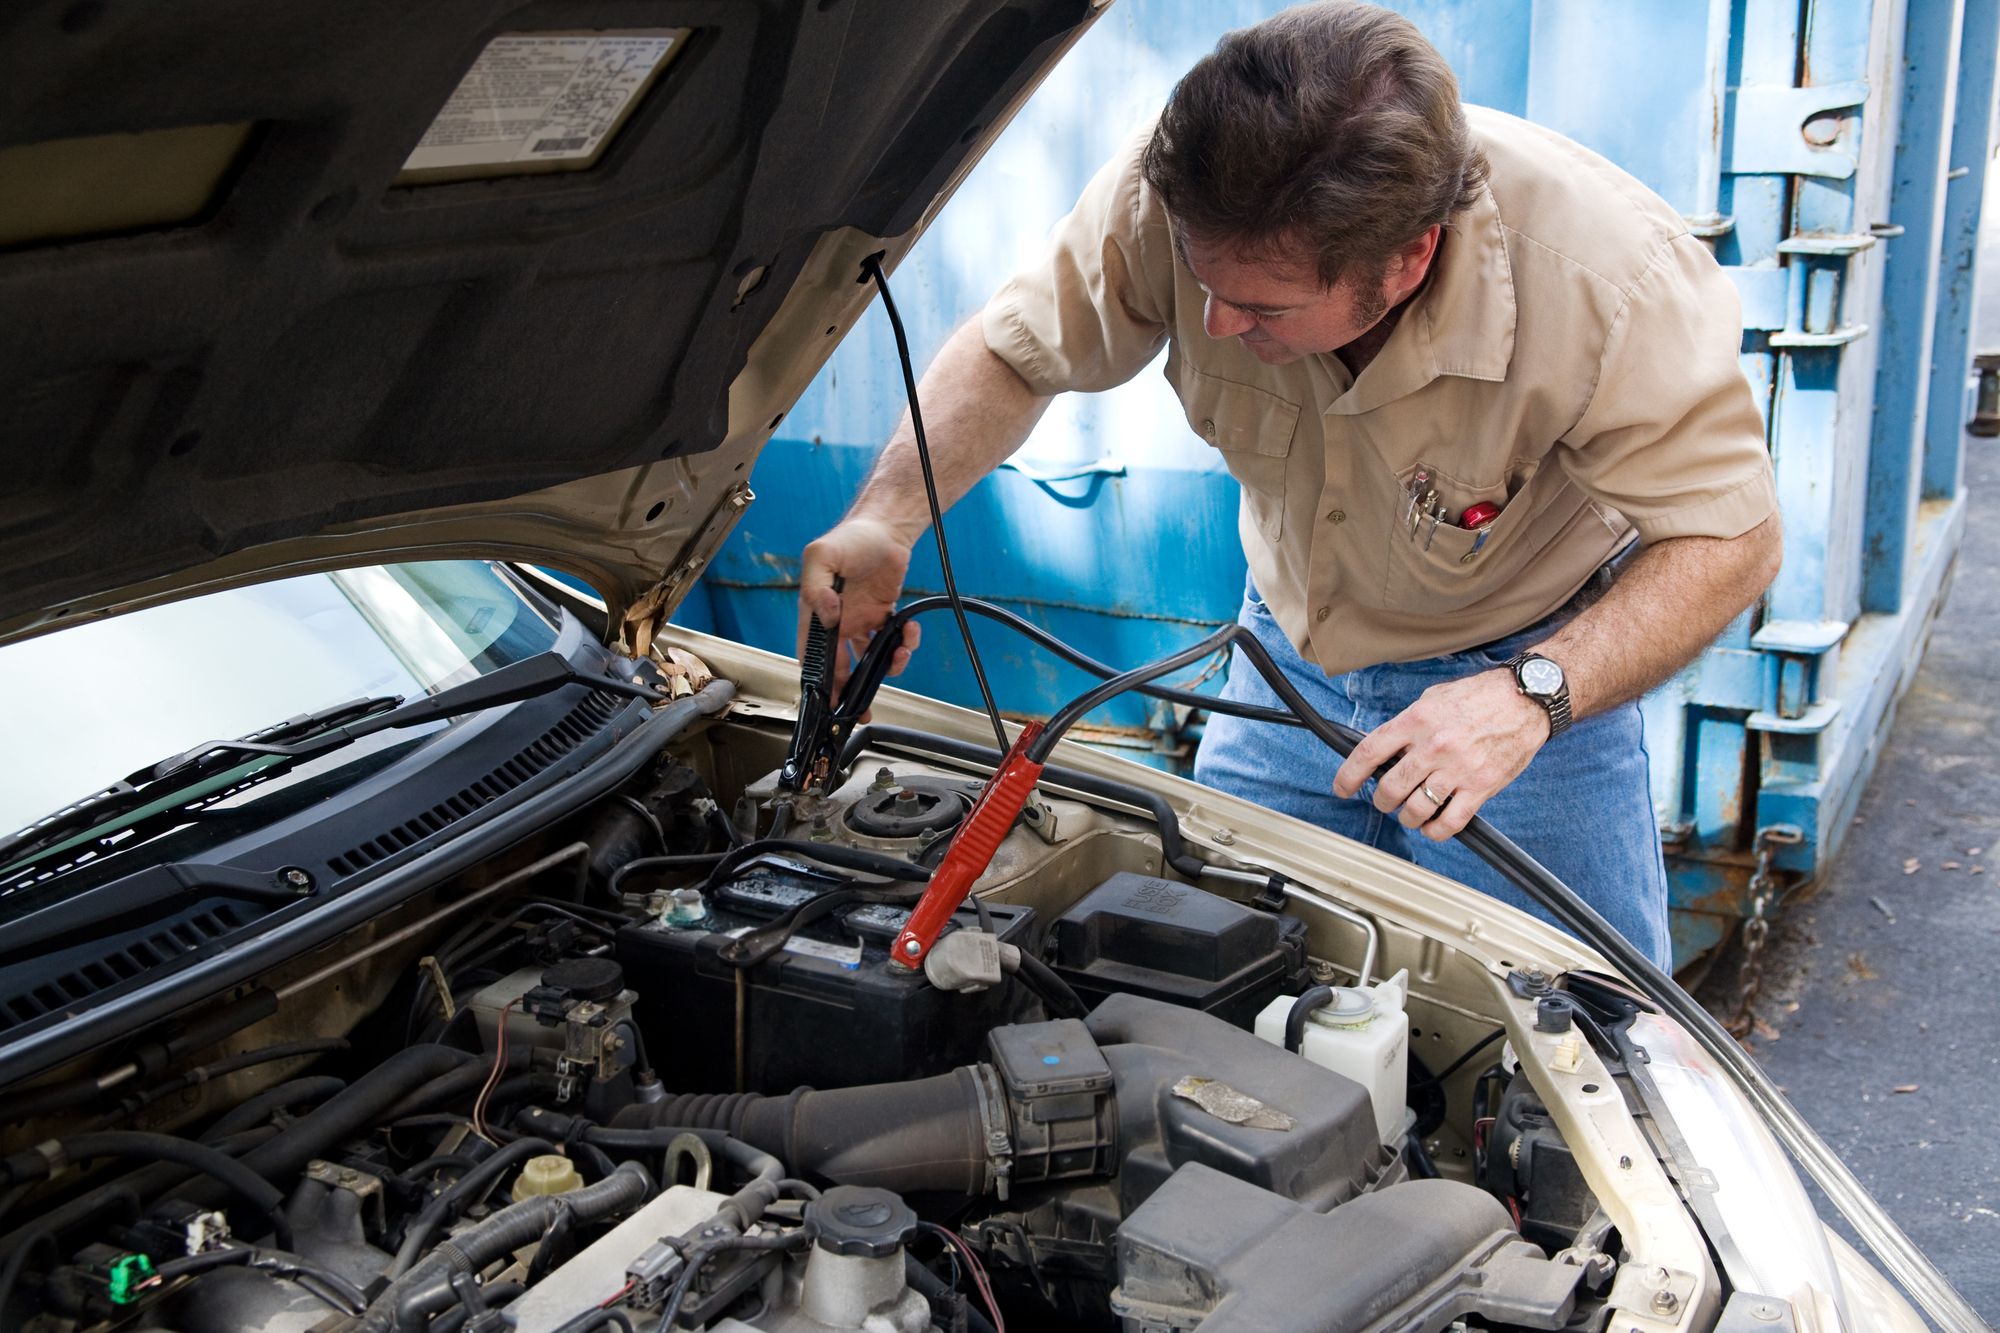 How to jump start a dead battery 10 quick and easy steps: How to correctly - and safely - jump start a car with a dead battery